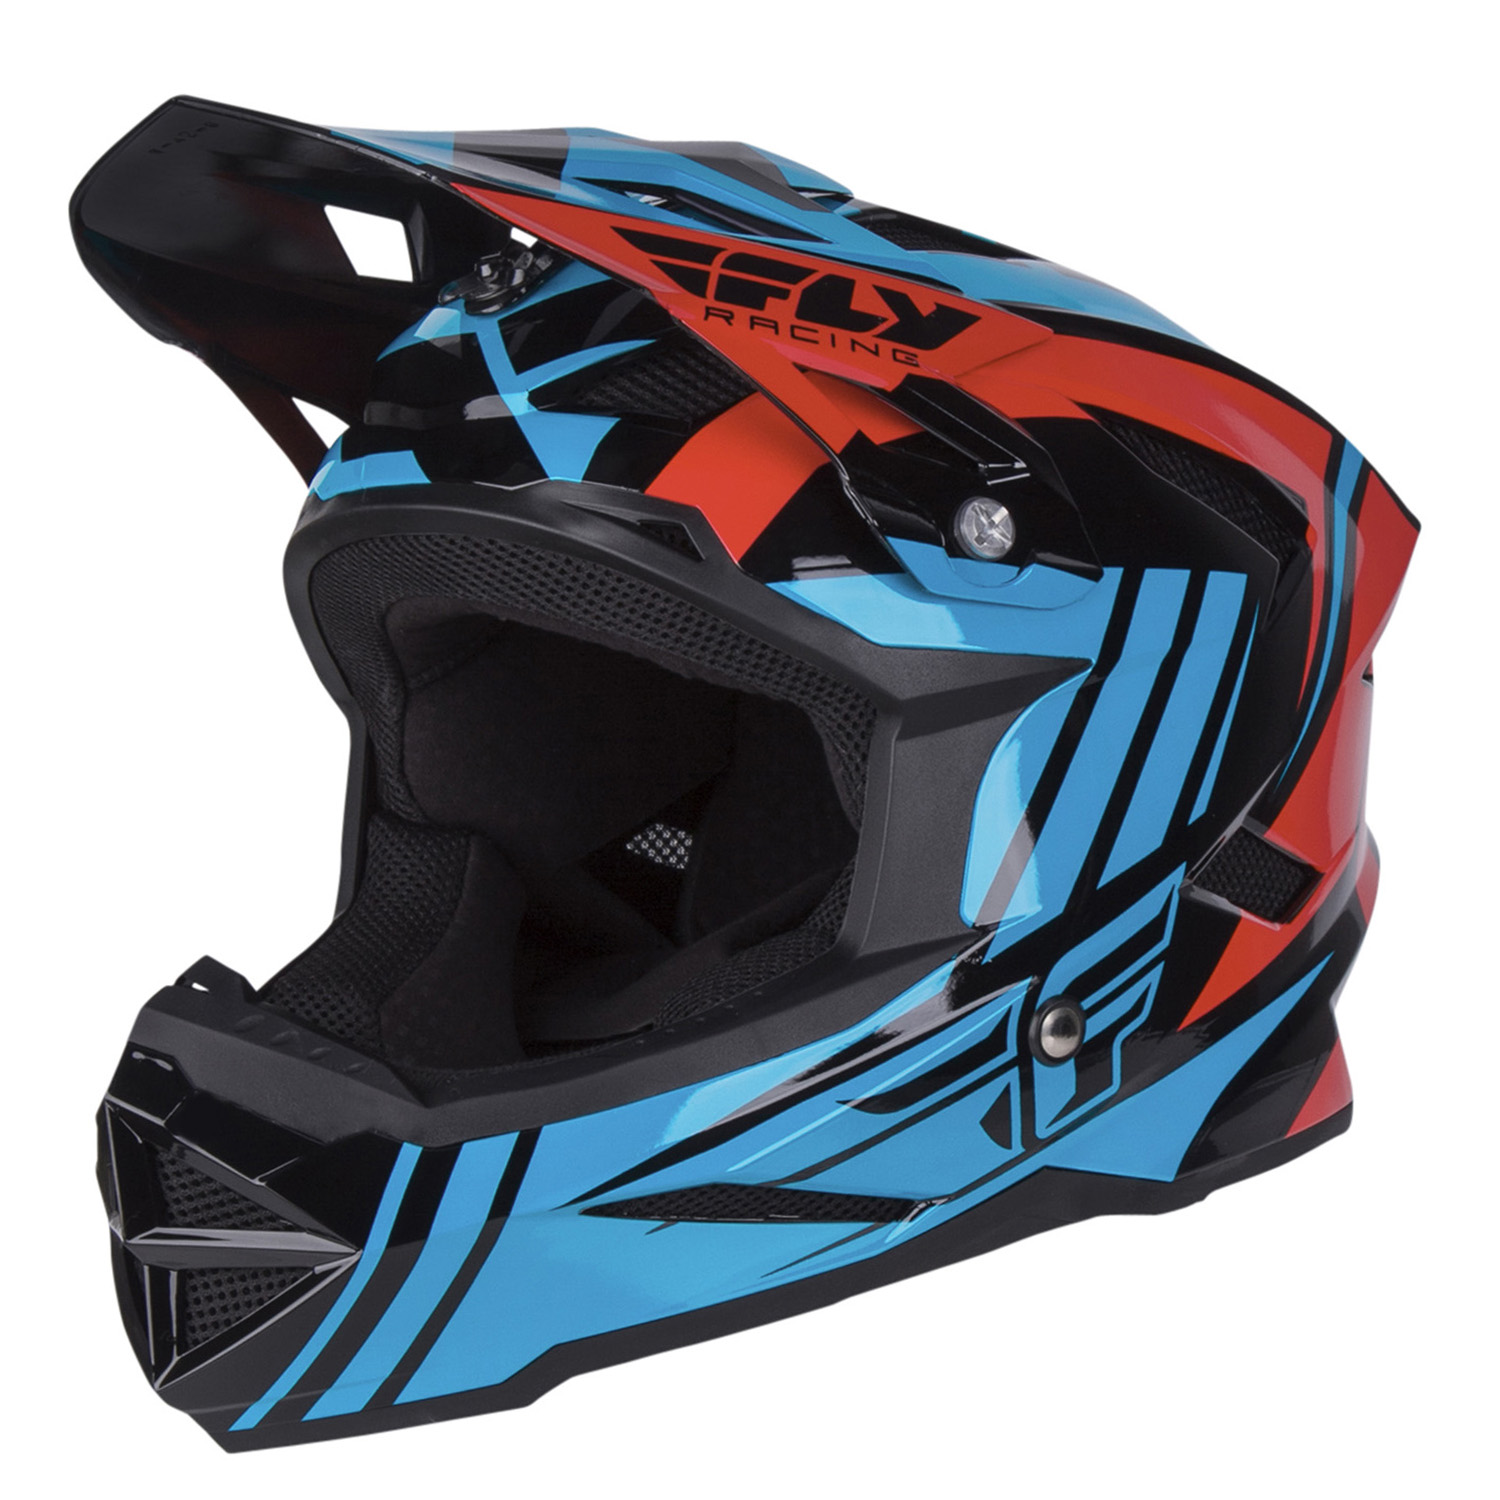 Fly Racing Casco MTB Downhill Default Teal/Red